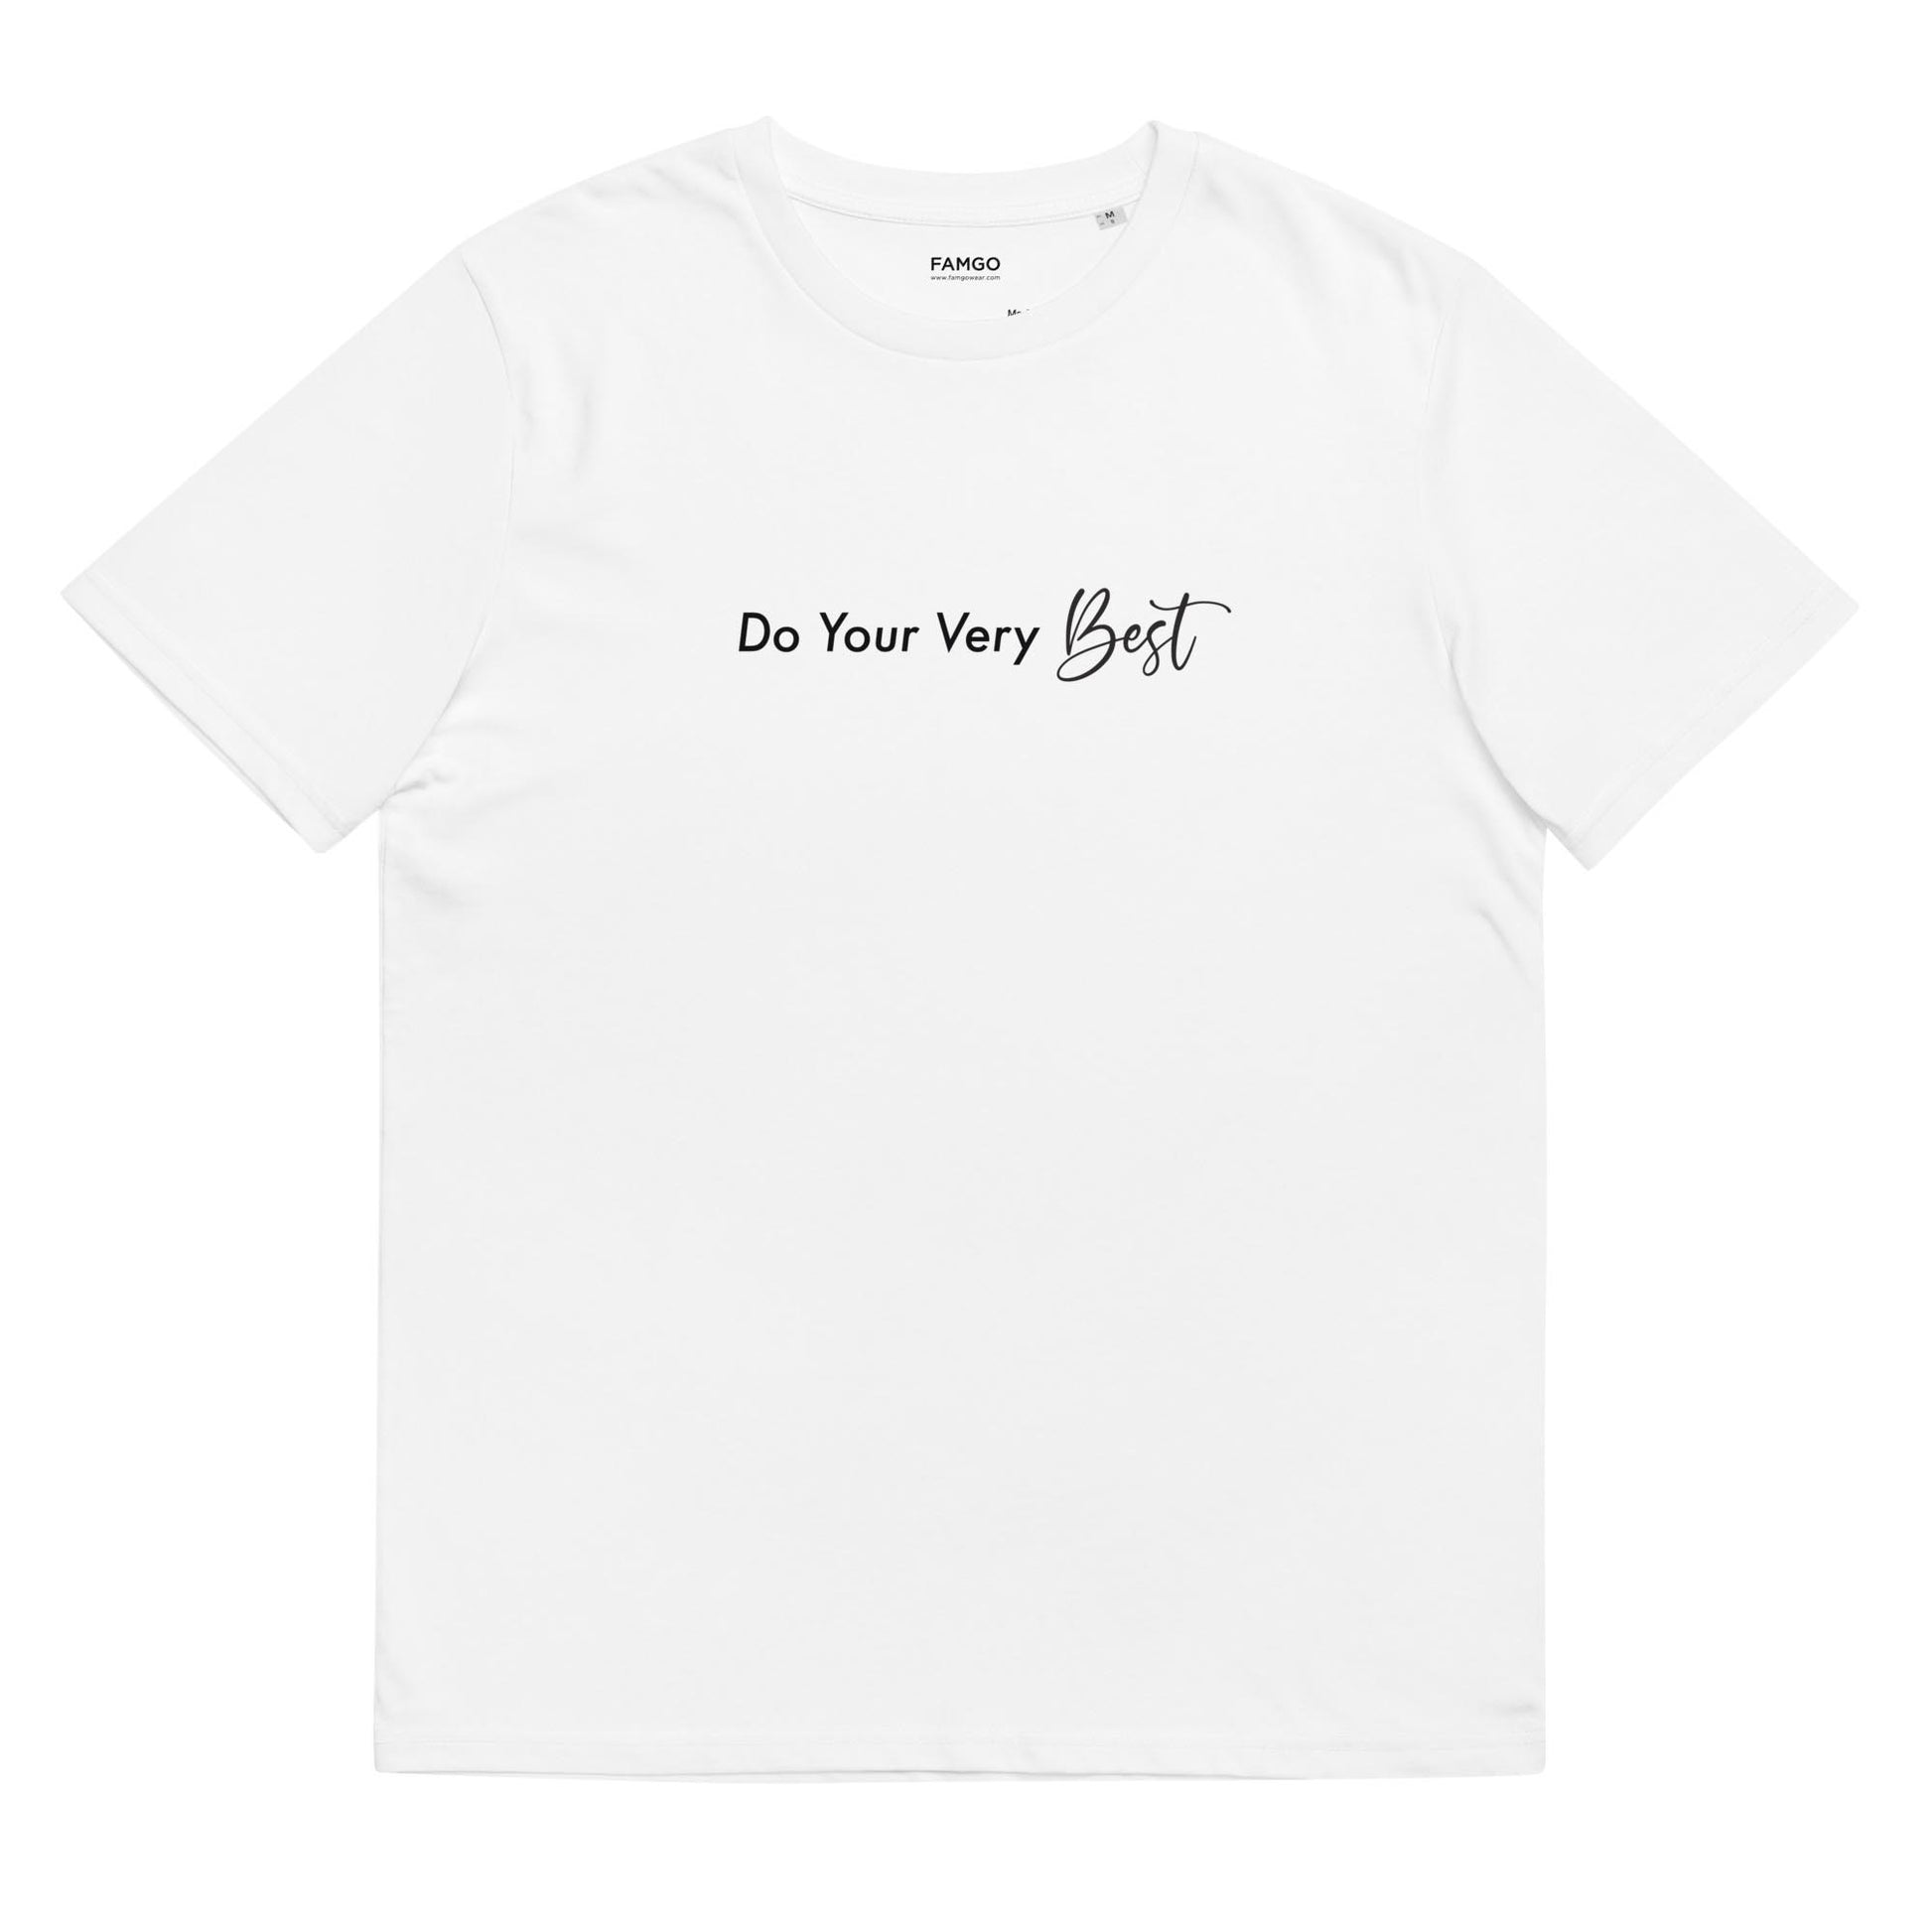 Men white motivational t-shirt with motivational quote, "Do Your Very Best."